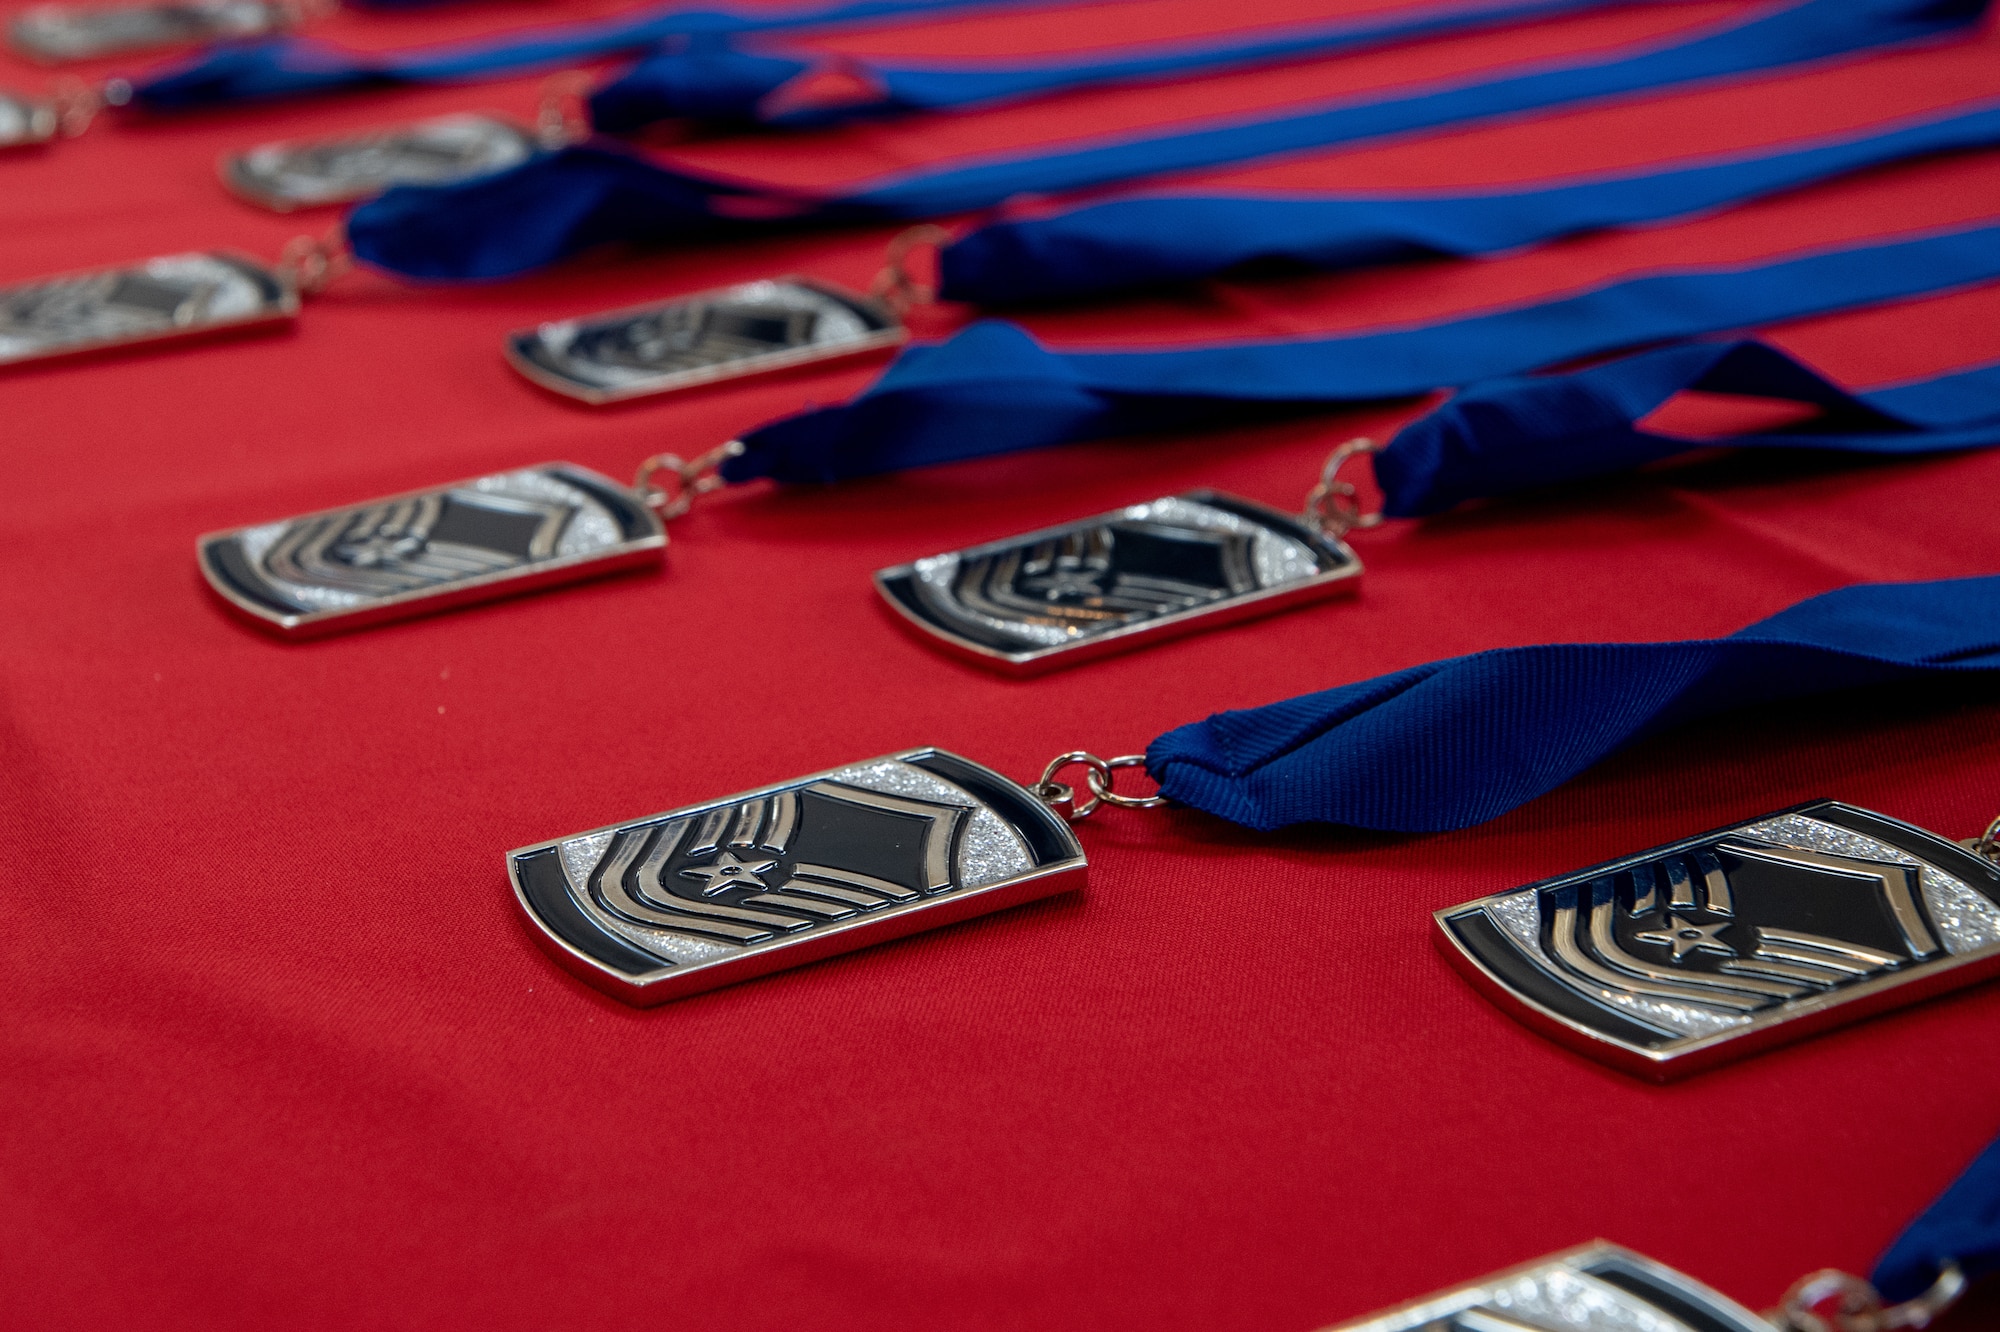 Master sergeant medallions are displayed on a table for a senior noncommissioned officer induction ceremony at Knob Noster, Missouri, Jan. 8, 2023. Thirteen of the 131st Bomb Wing's newest master sergeants were inducted into the wing’s SNCO Corps. (U.S. Air National Guard photo by Airman 1st Class Phoenix Lietch)